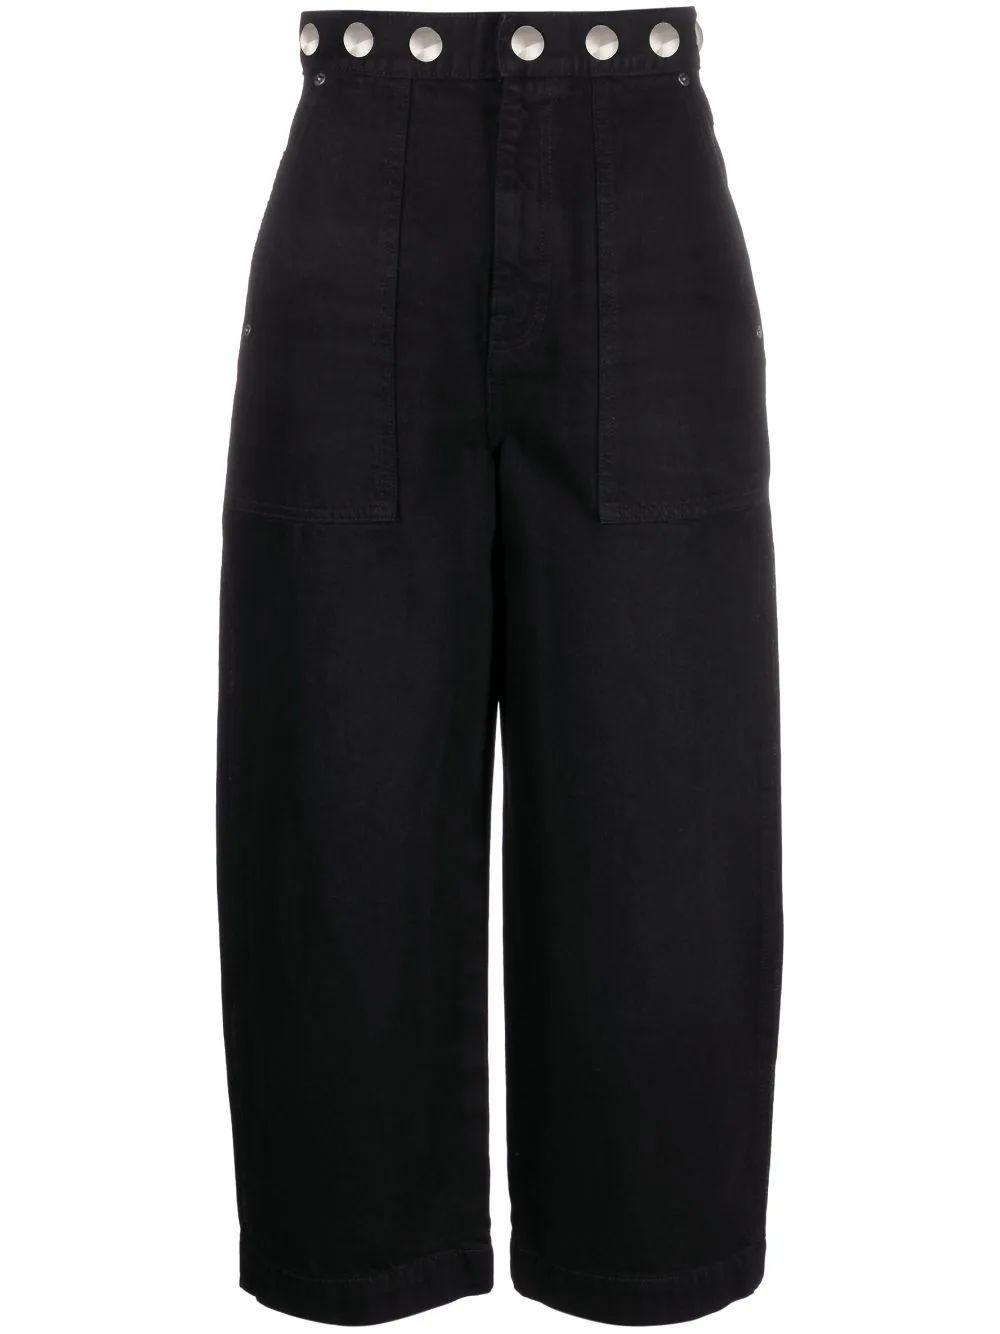 The DetailsKHAITEstud-detail cropped jeansKhaite puts a characteristically playful spin on denim ... | Farfetch Global